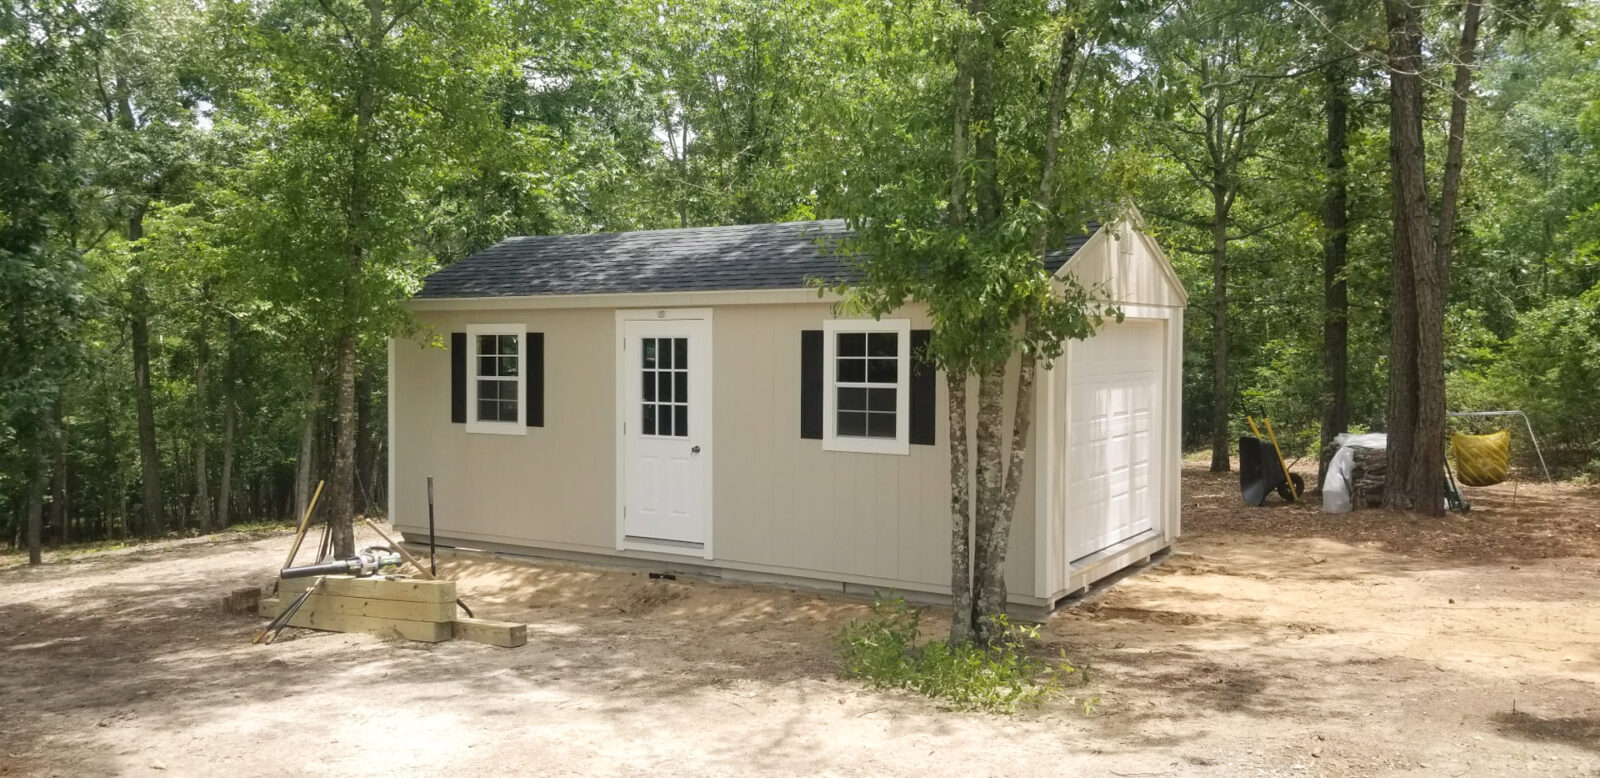 A garage up to garage building permits in SC